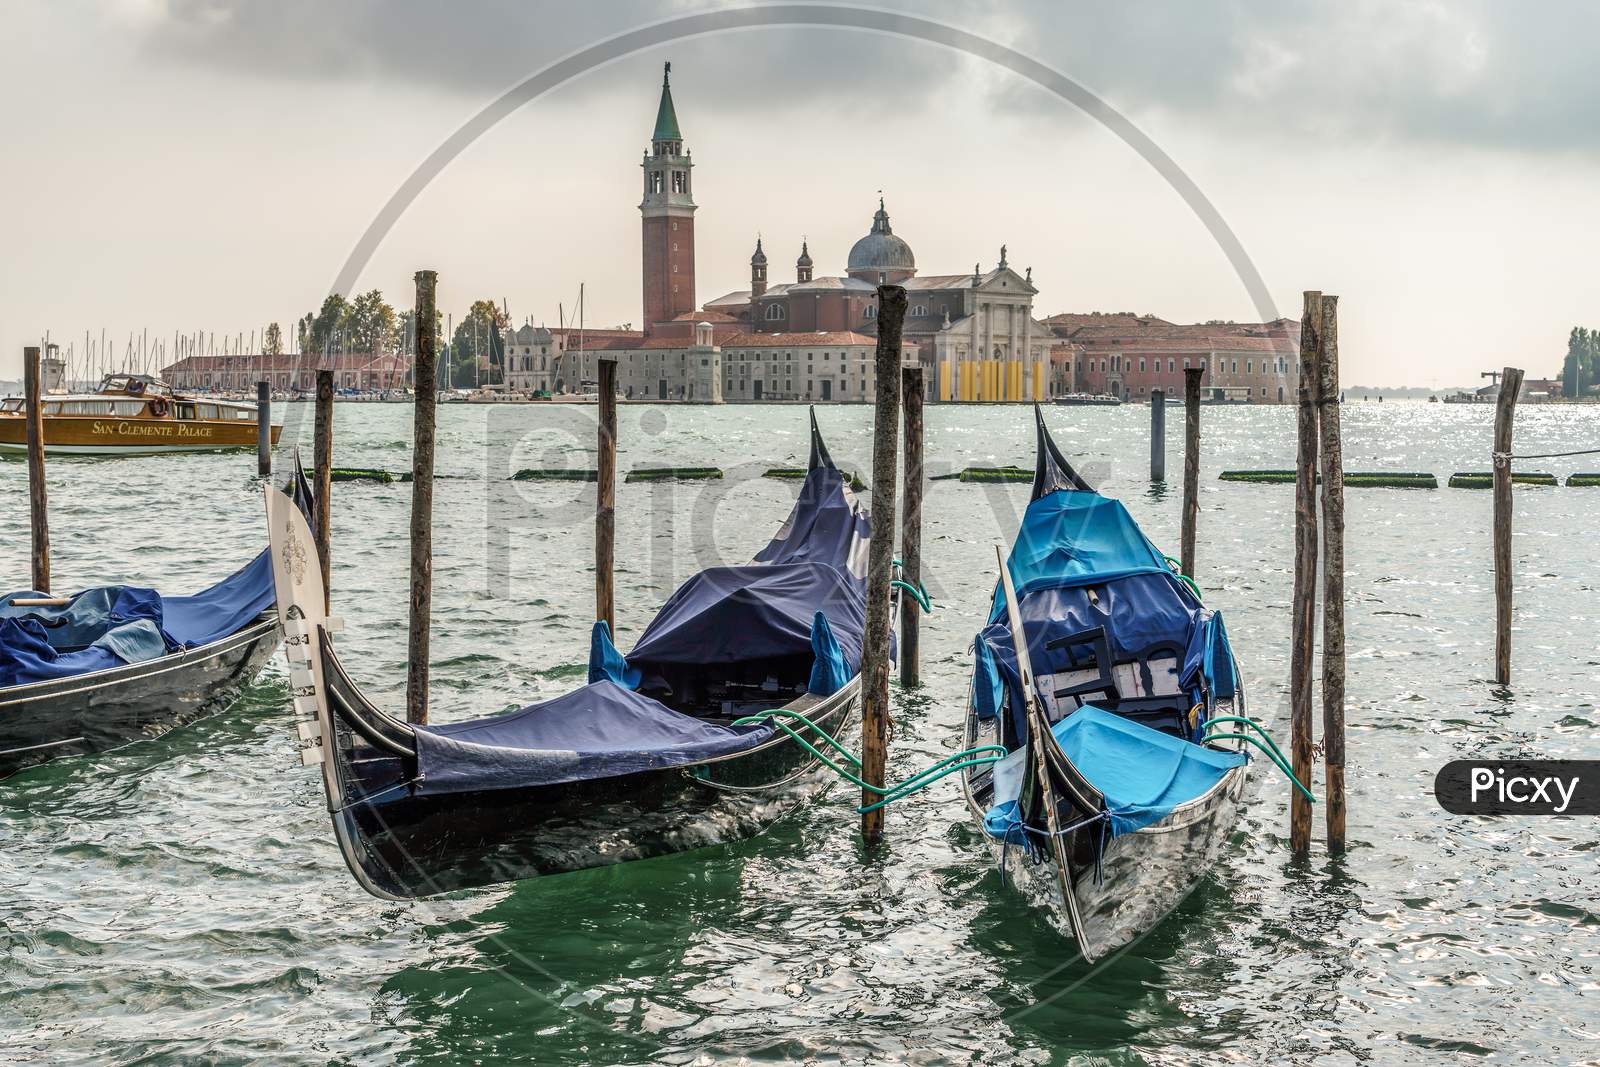 Gondolas Moored At The Entrance To The Grand Canal